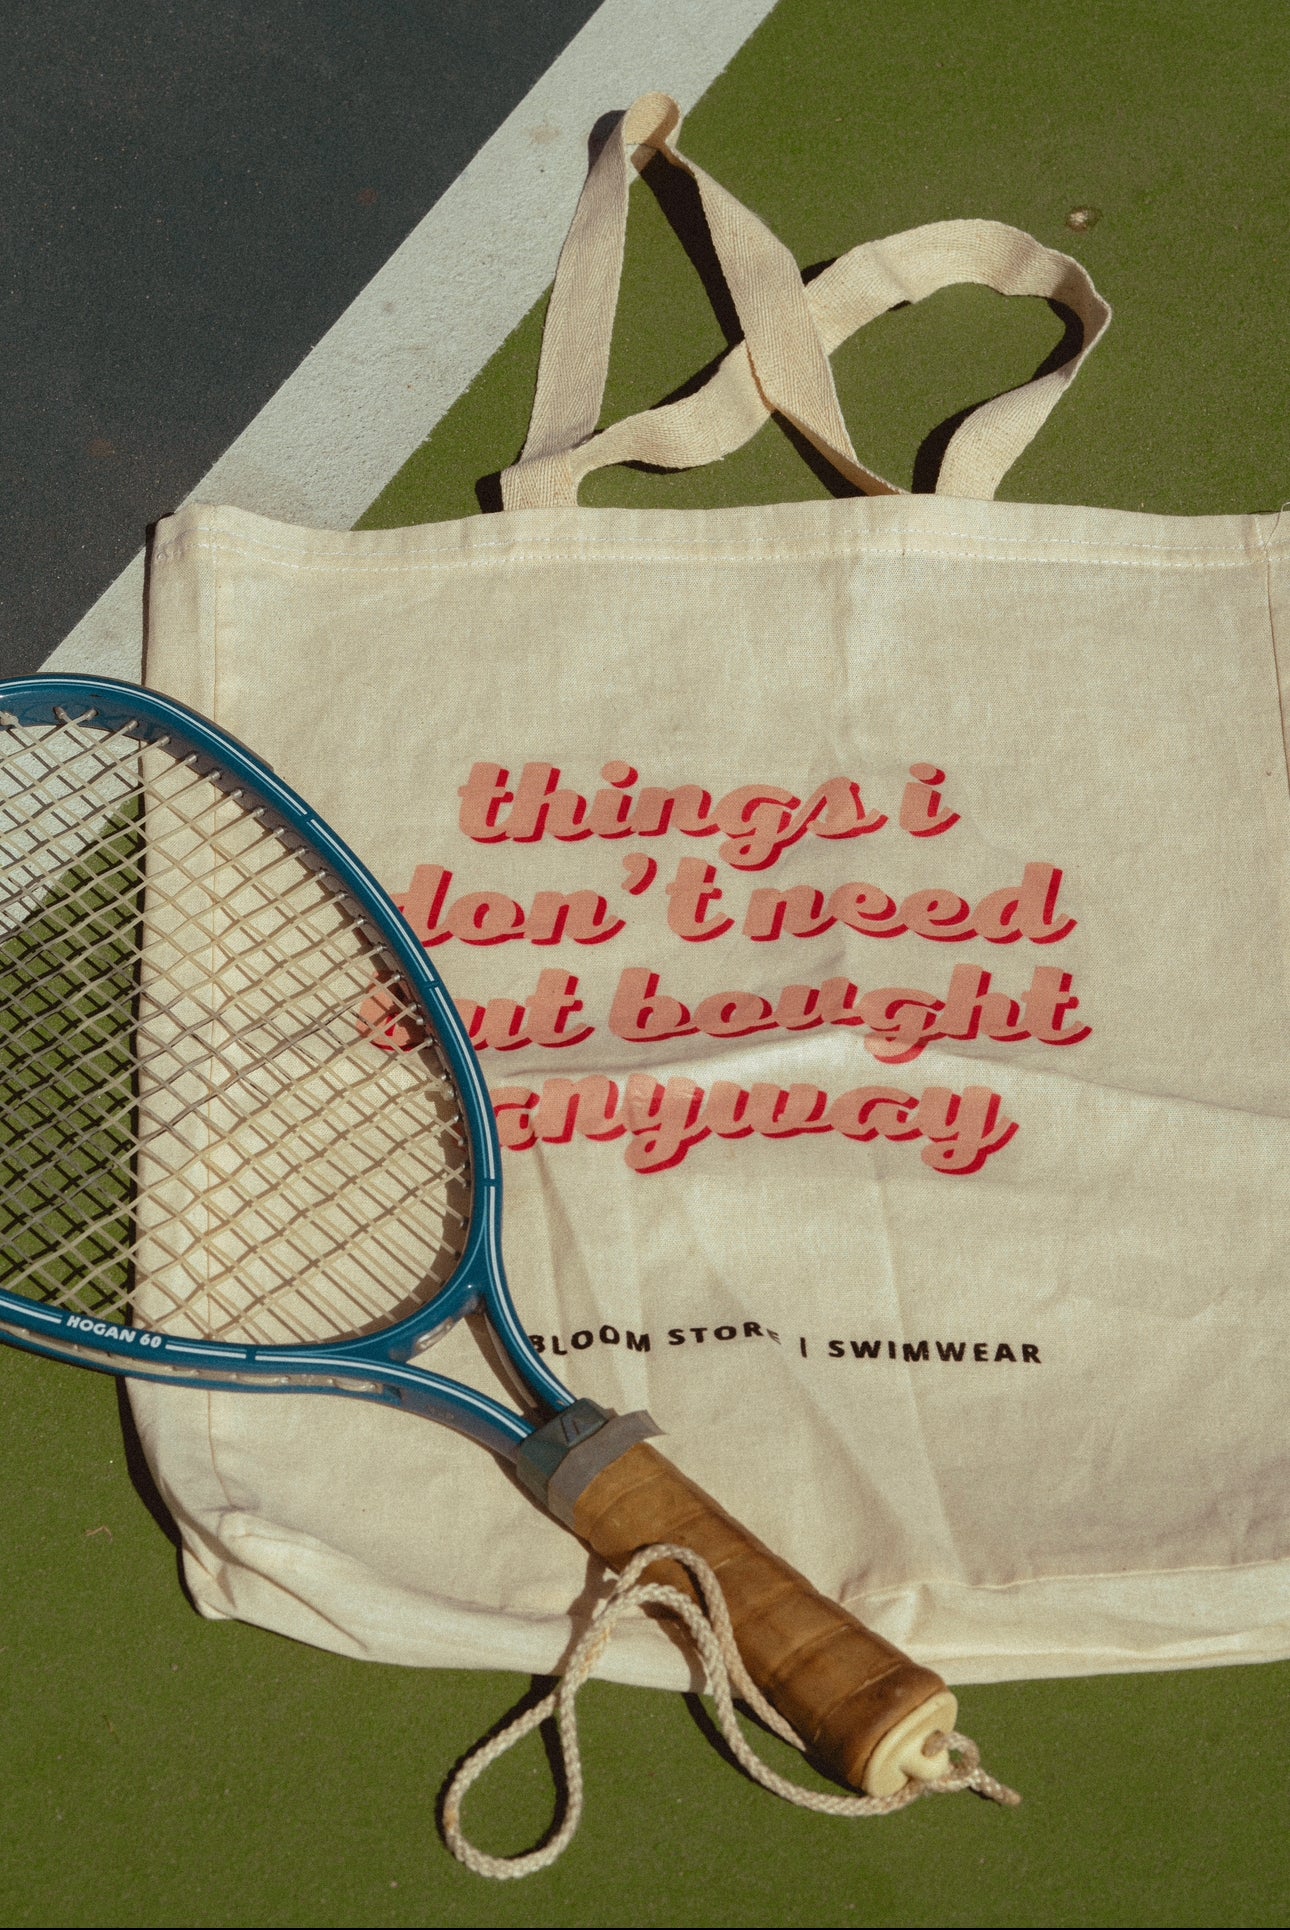 Ecobag "things I don't need but bought anyway"